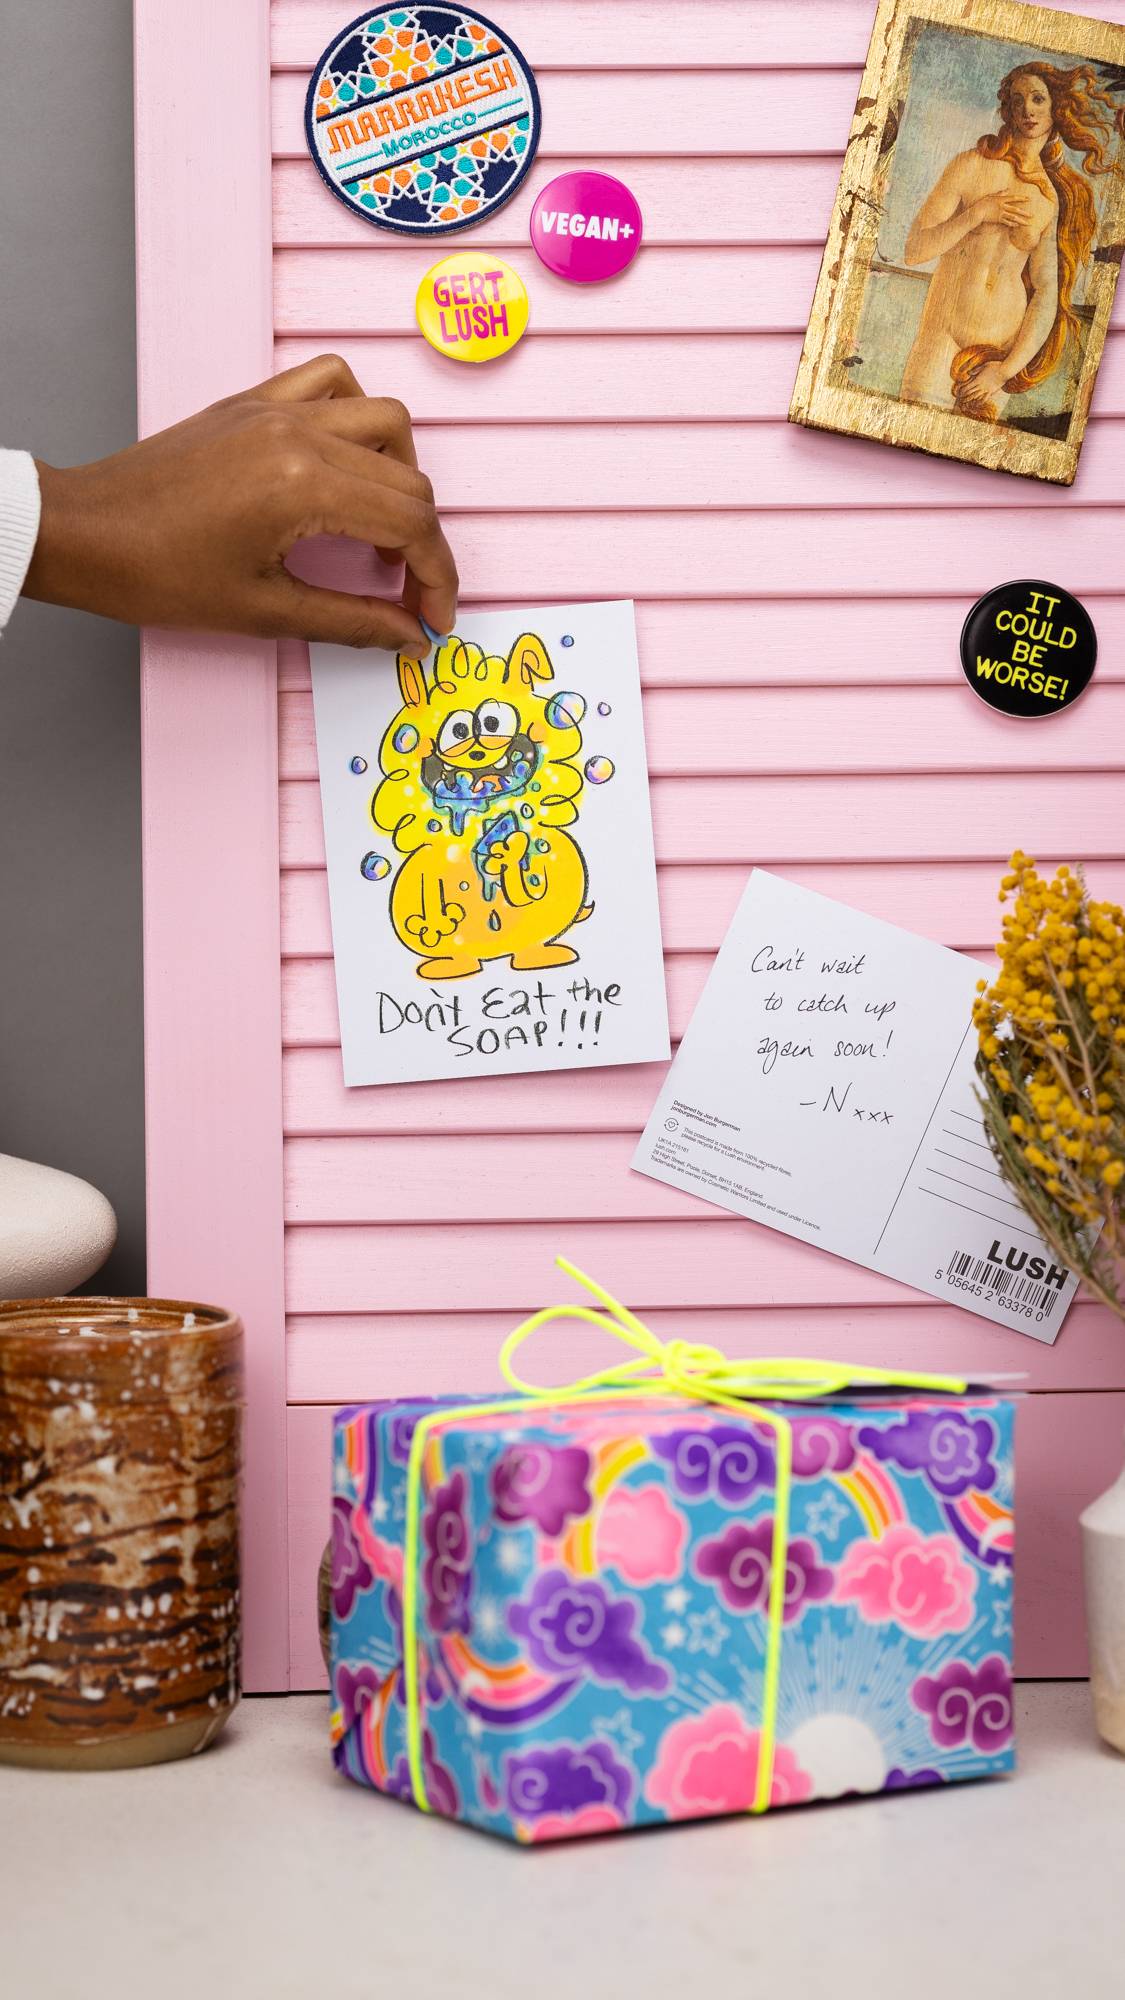 Model is pinning the Don't Eat The Soap postcard on a pastel pink noticeboard surrounded by badges and a gift.